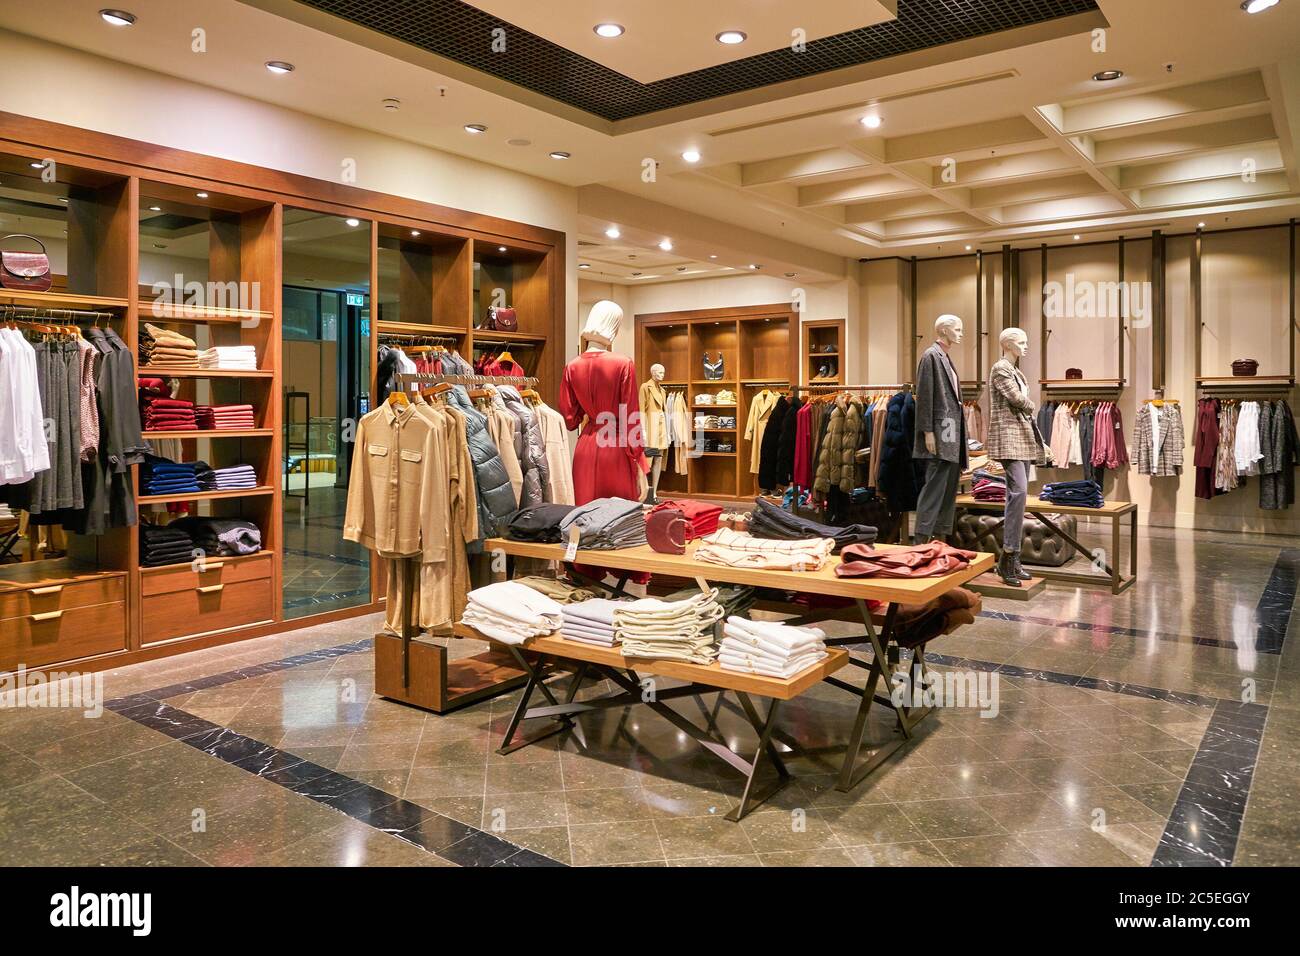 Massimo dutti boutique hi-res stock photography and images - Alamy